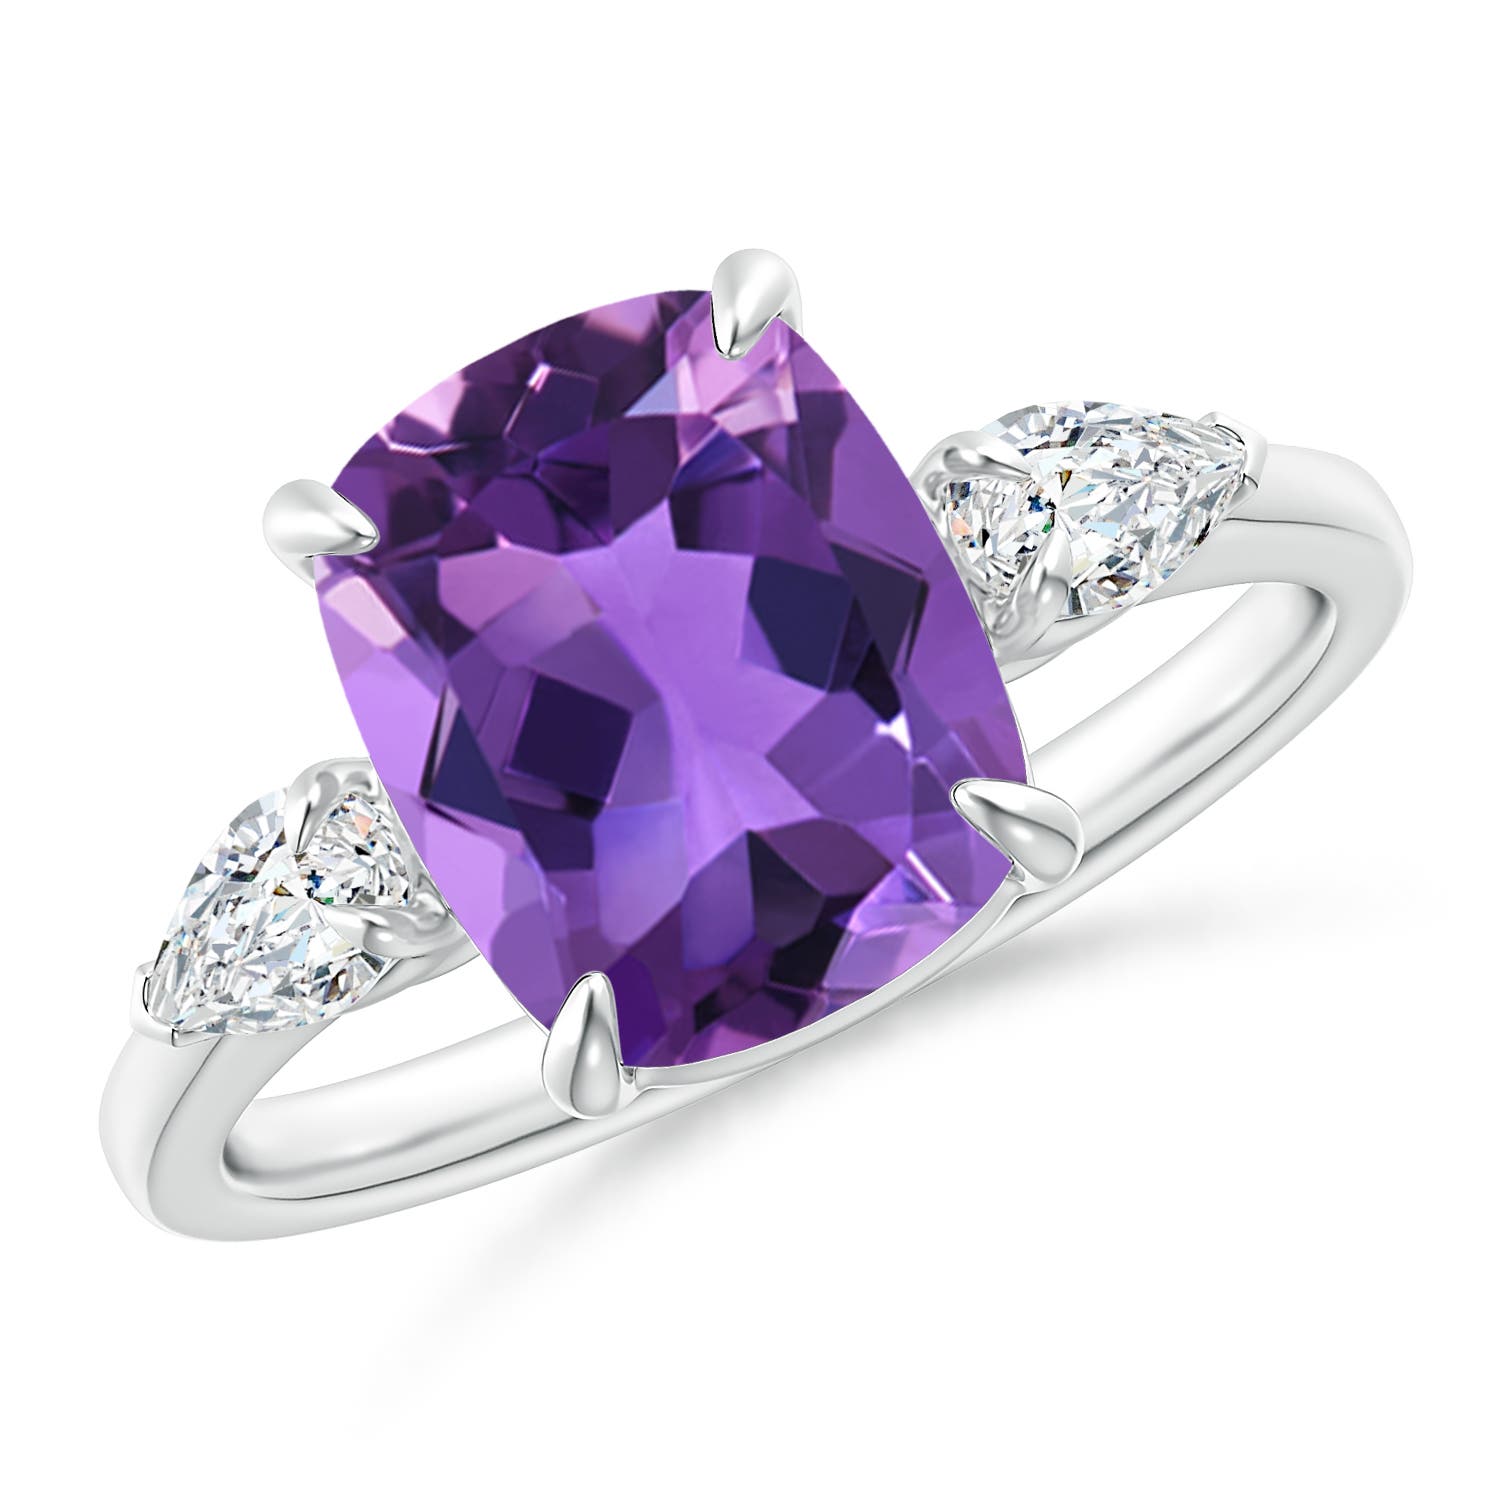 AAA - Amethyst / 3.1 CT / 14 KT White Gold